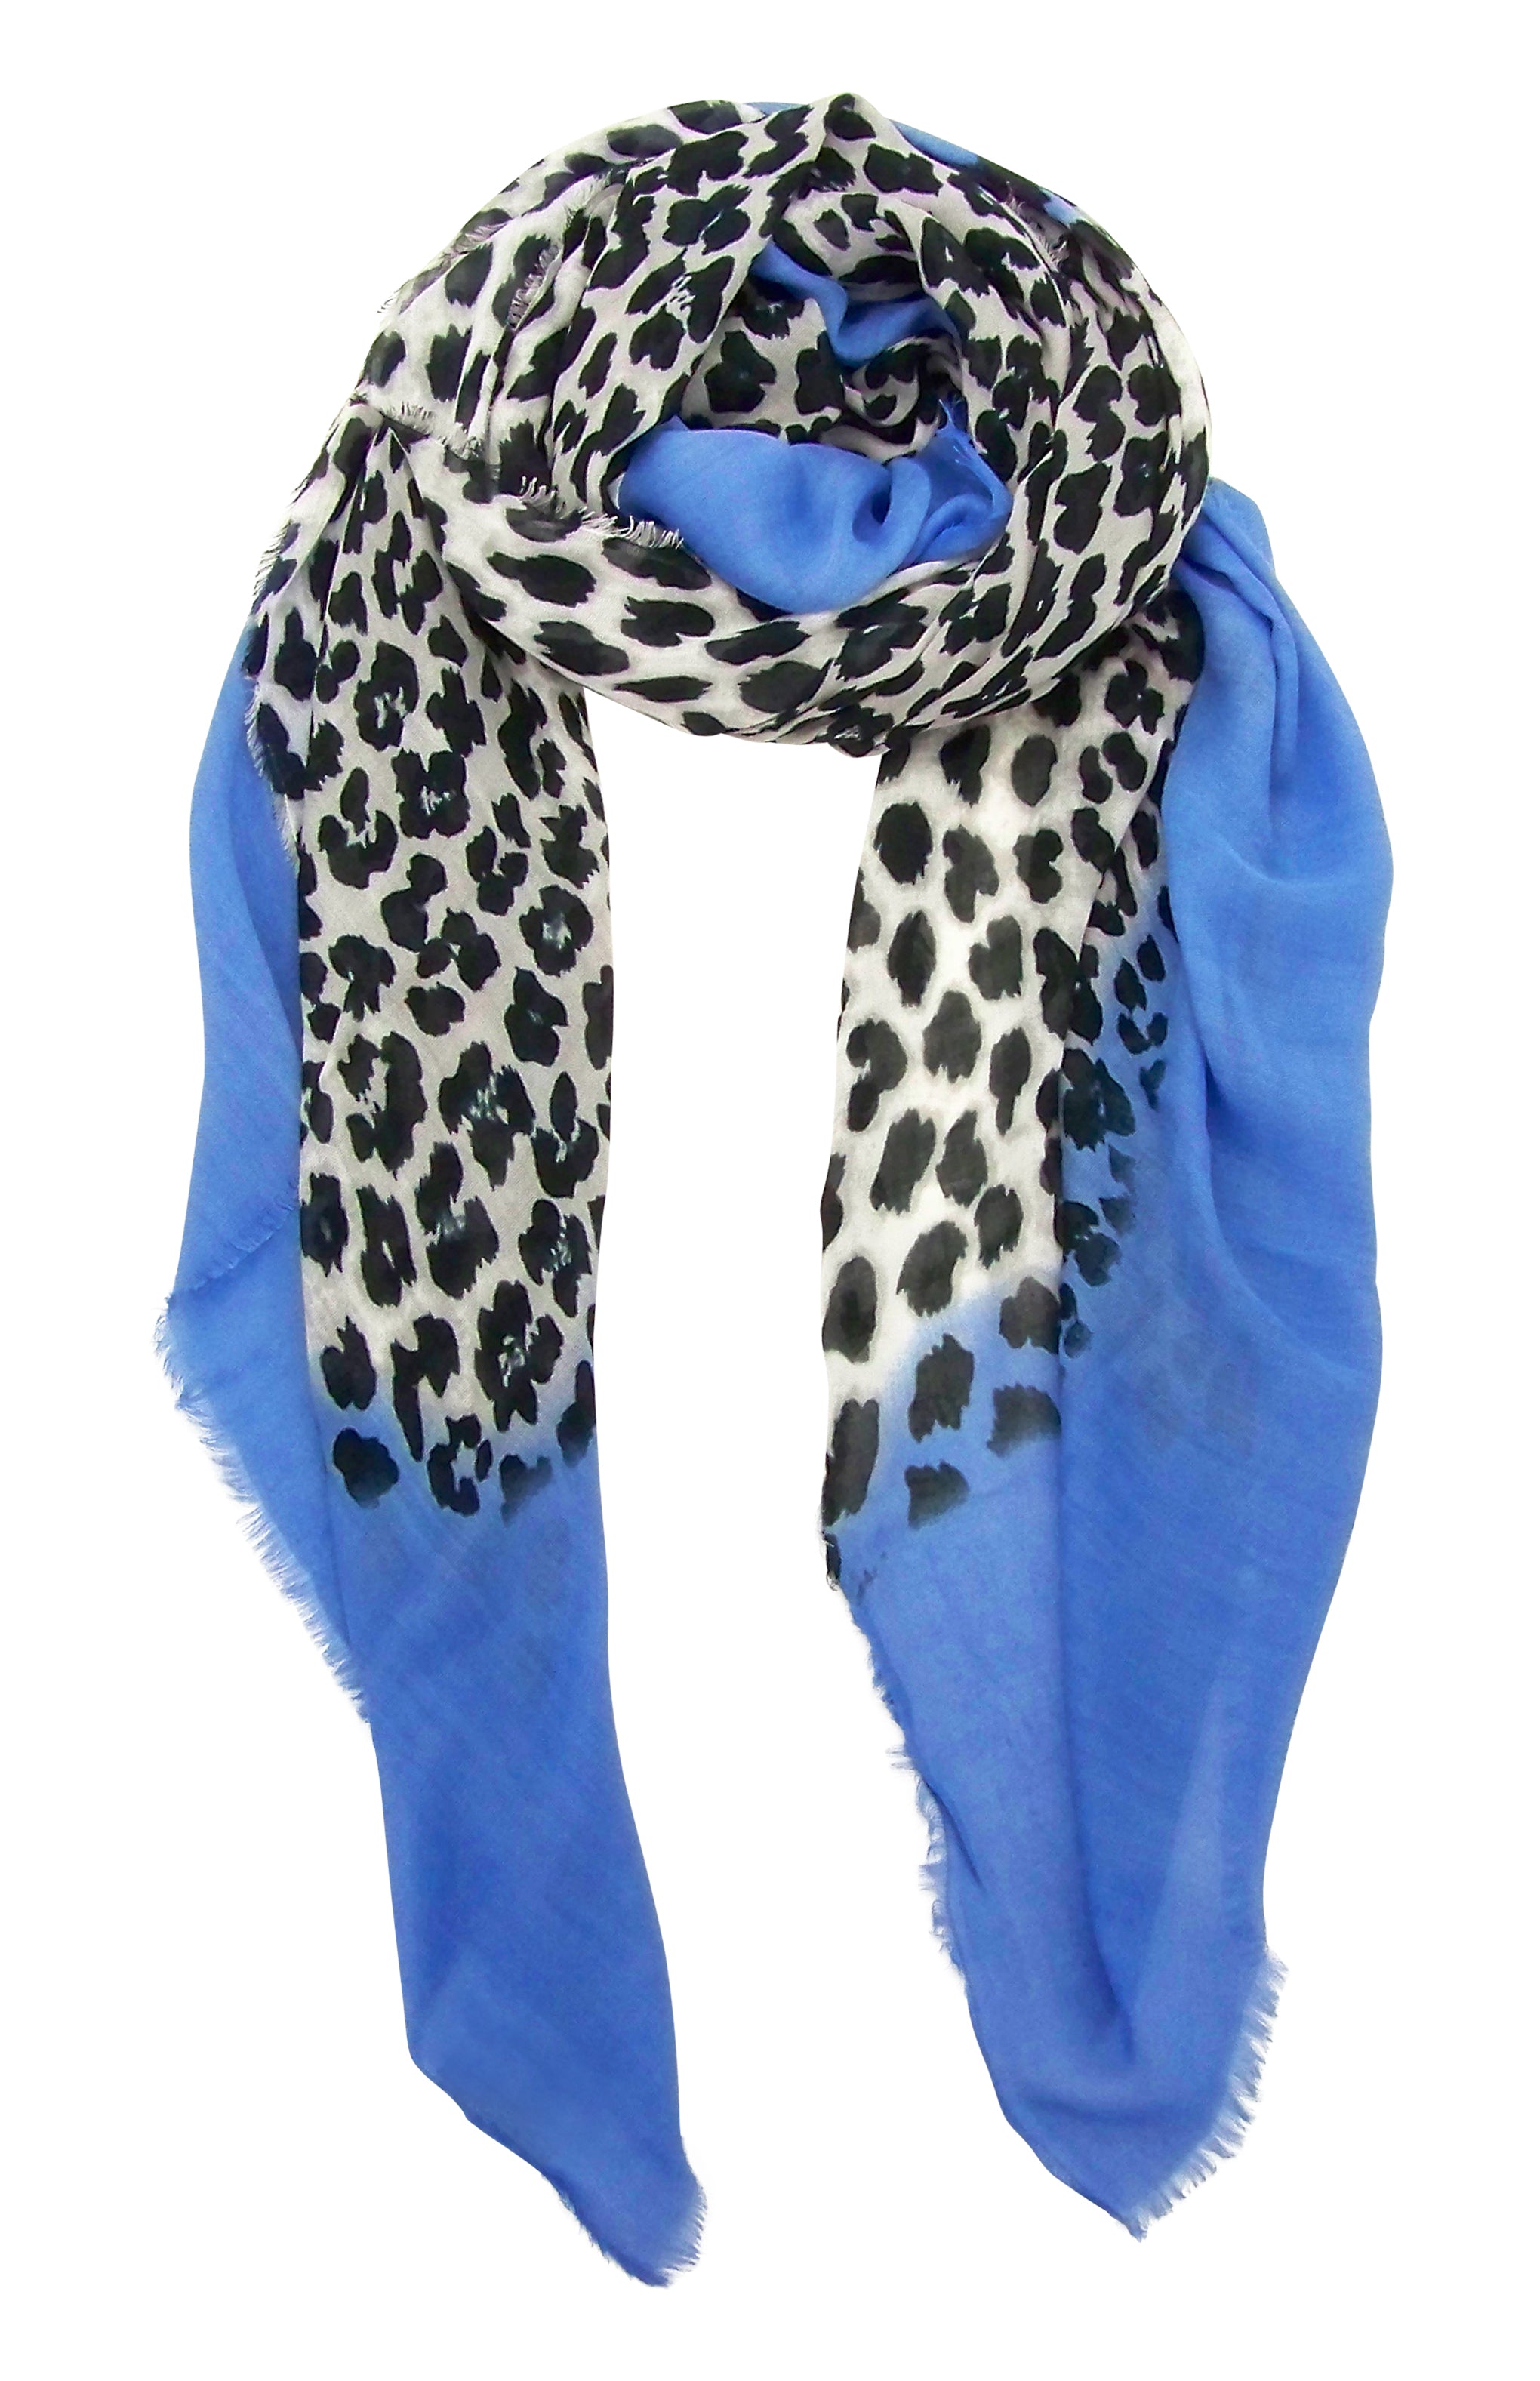 Blue Pacific Animal Print Cashmere Silk Scarf in Denim and Snow 78 x 22